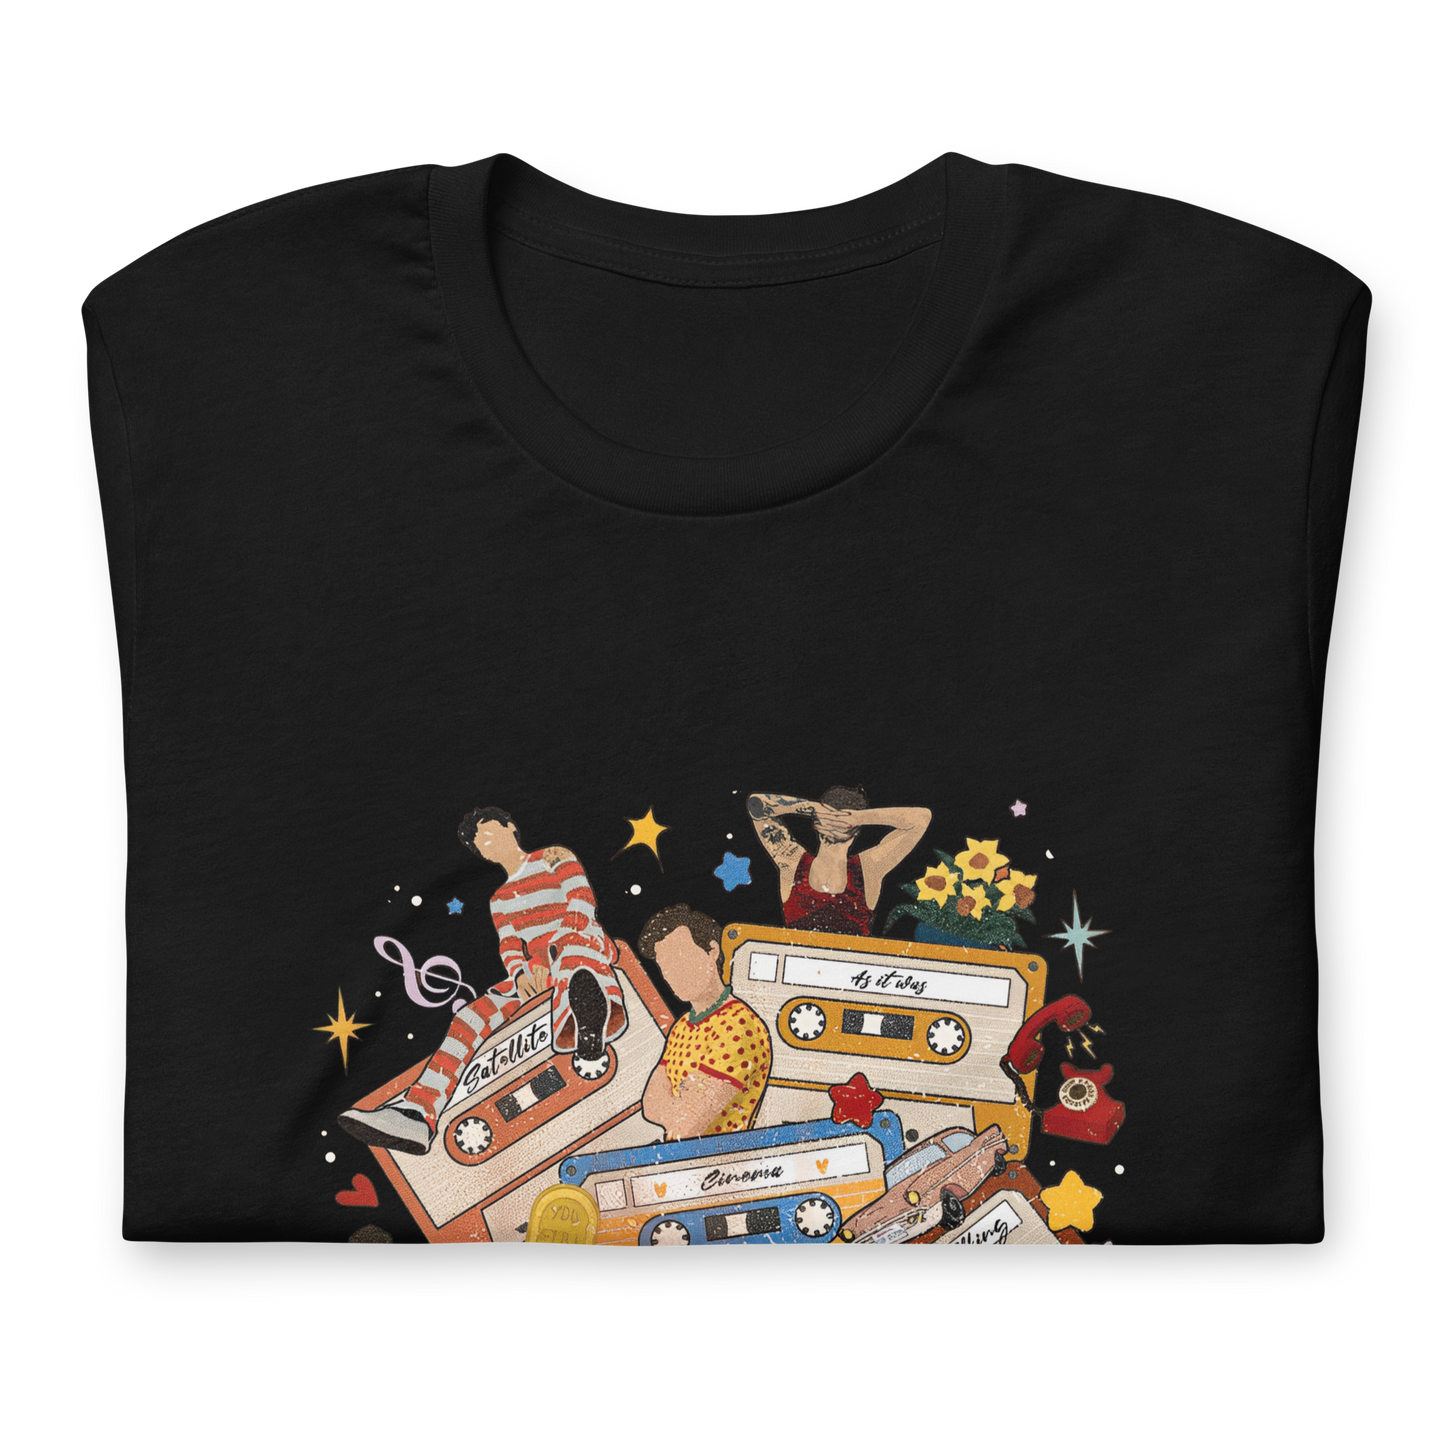 Vintage-Style Harry's House T-Shirt